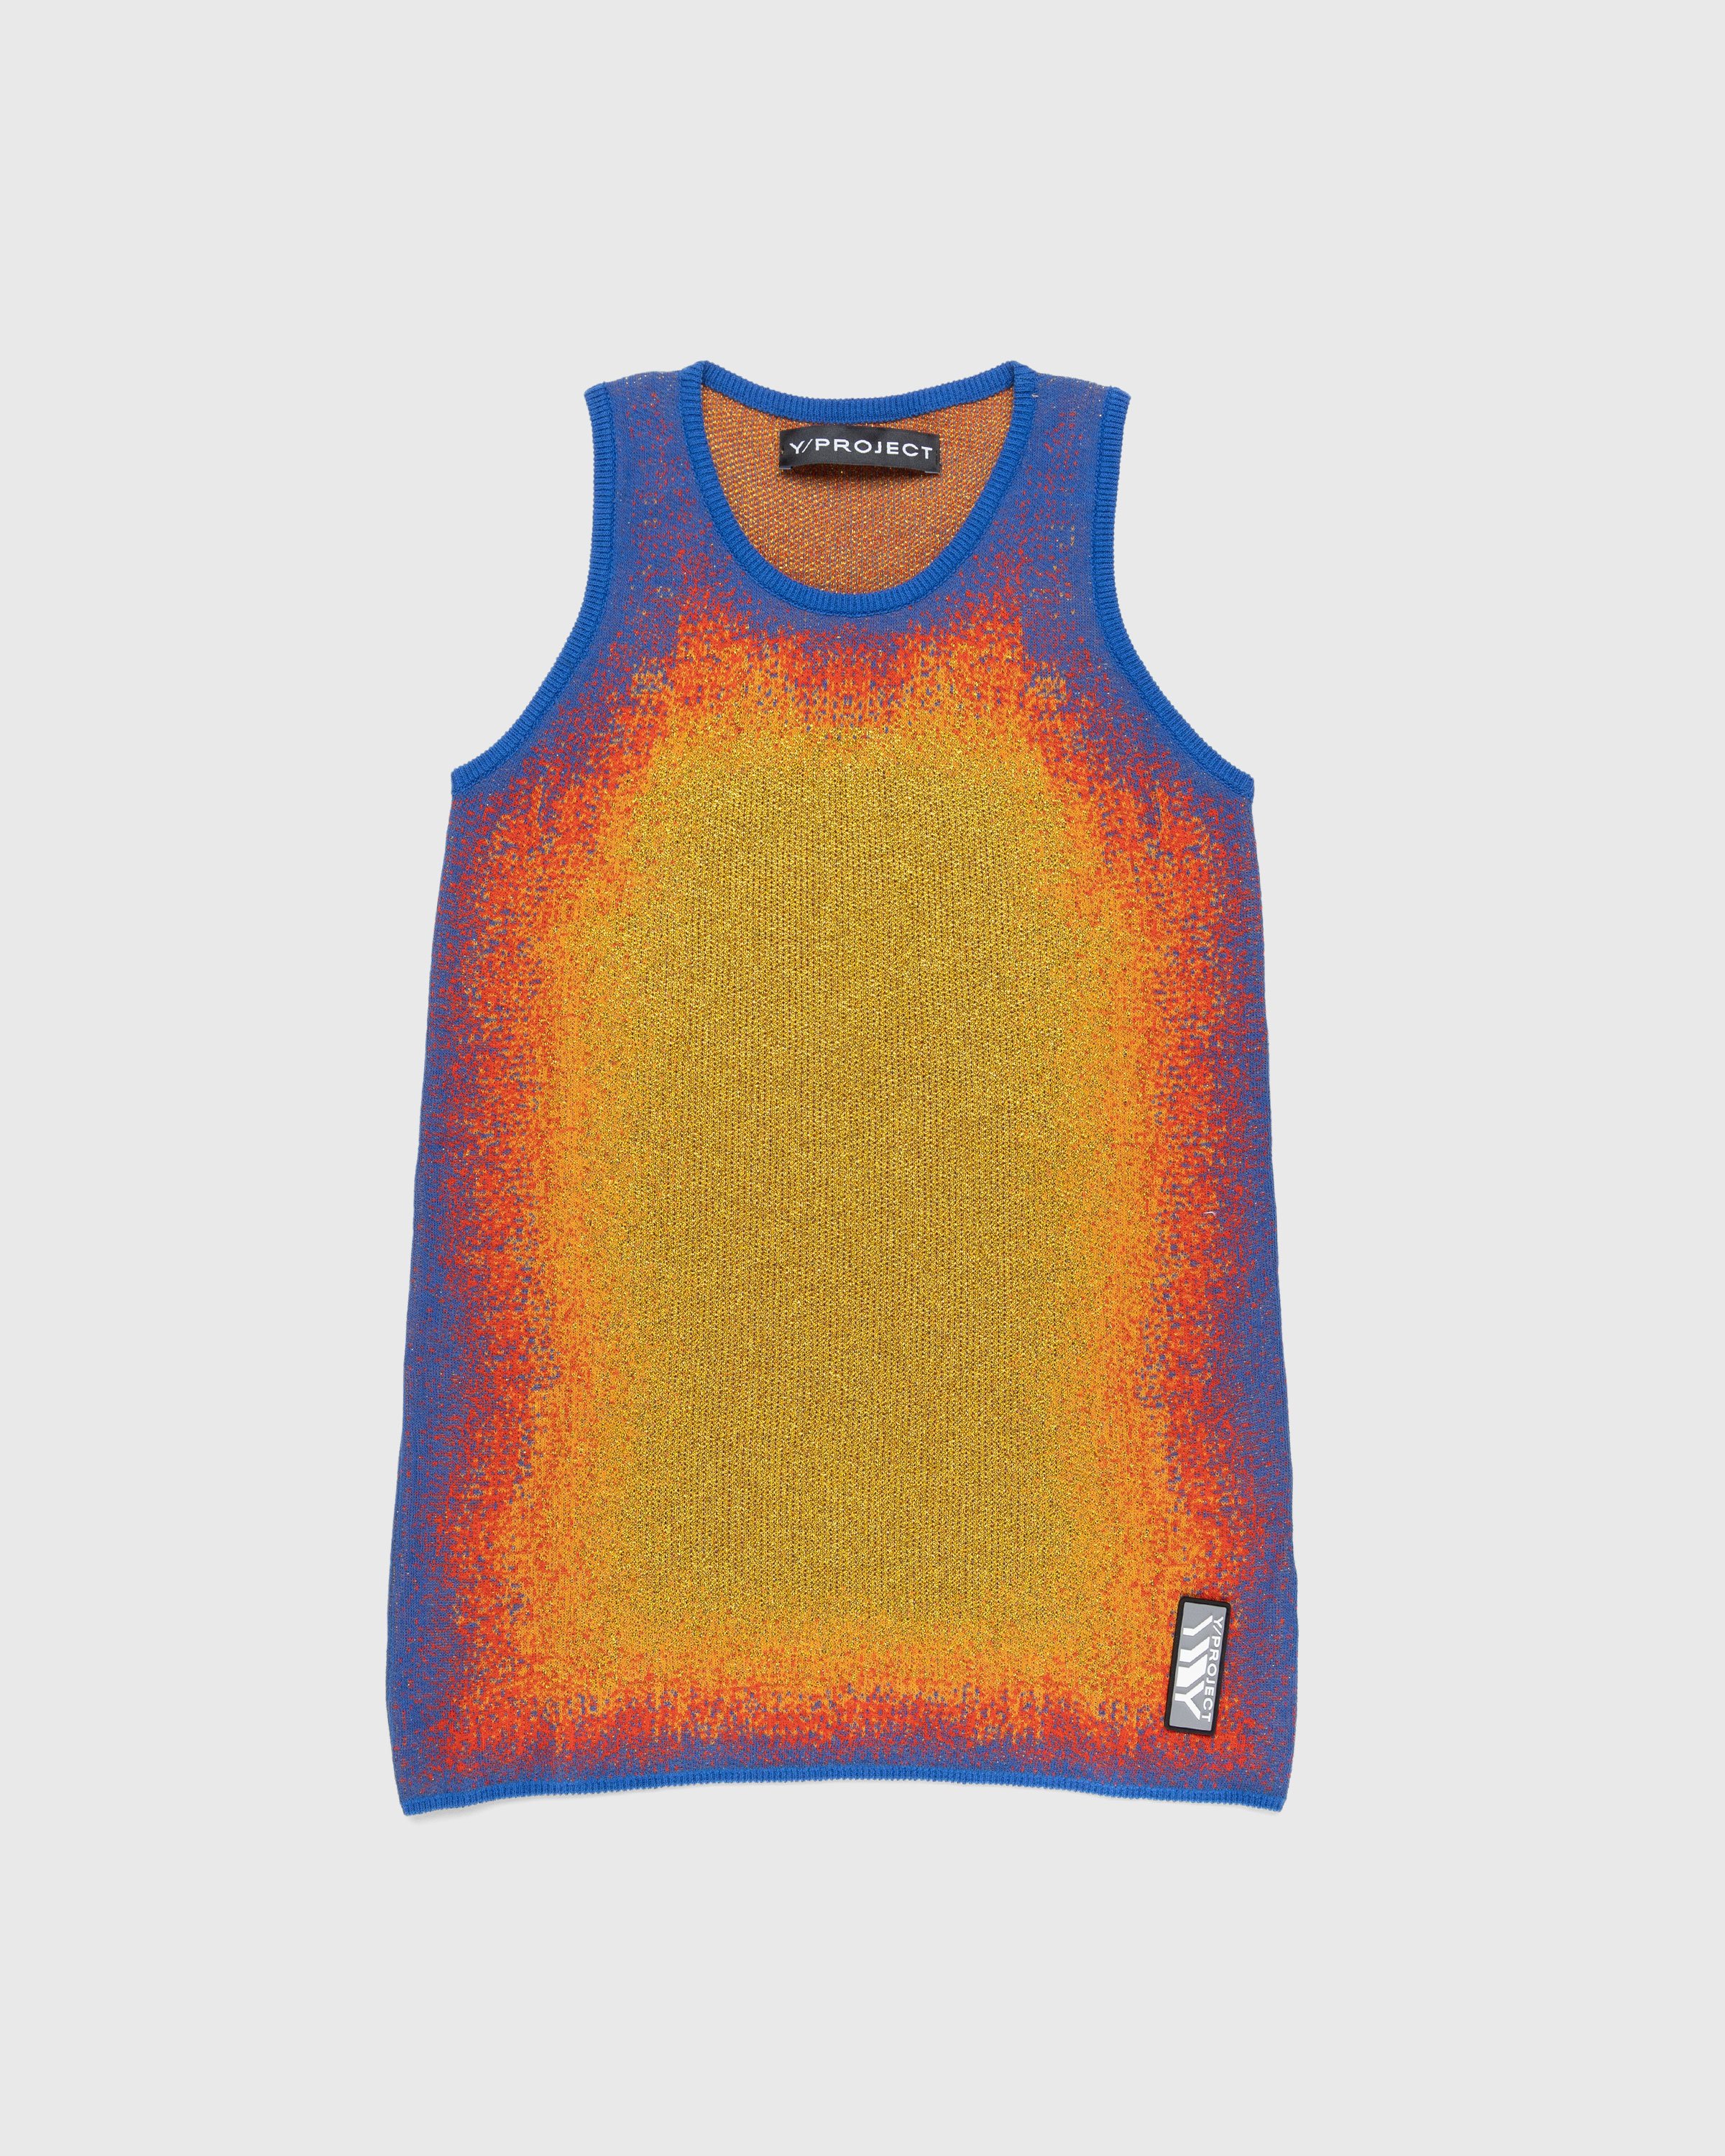 Y/Project - Gradient Knit Tanktop - Clothing - Multi - Image 1